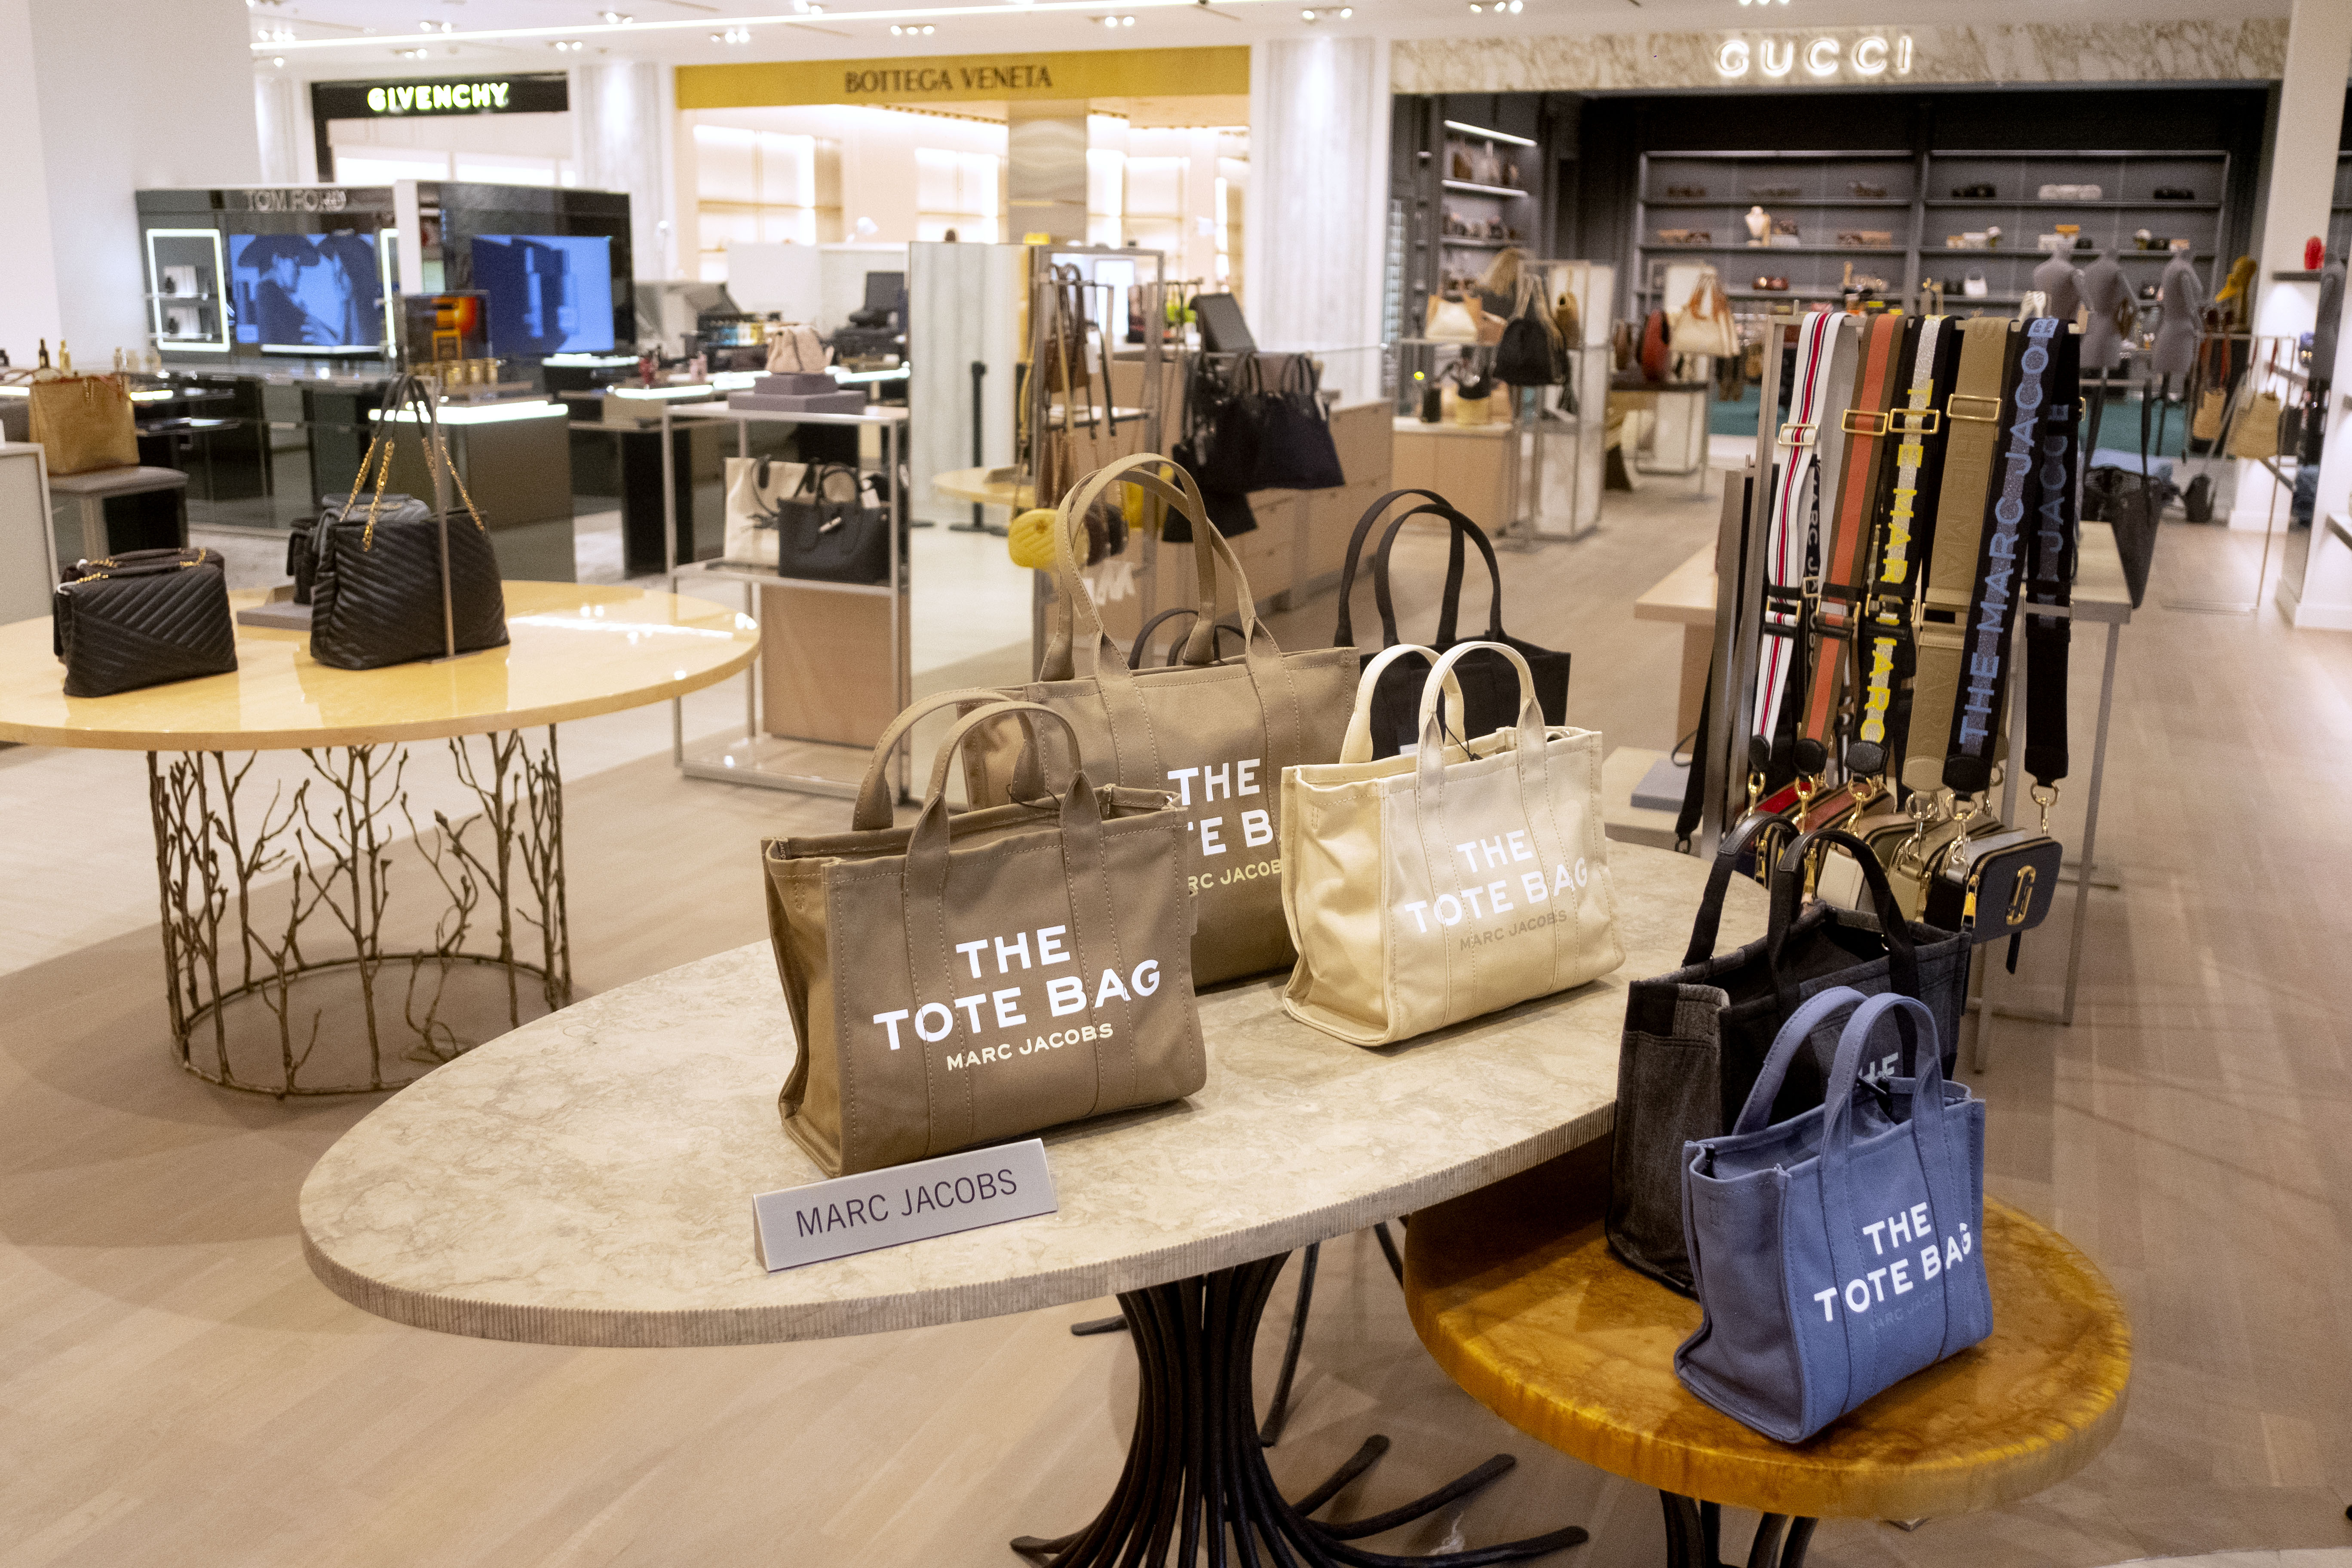 American Dream mall opens luxury wing today including Saks Fifth Avenue's  return to N.J. 